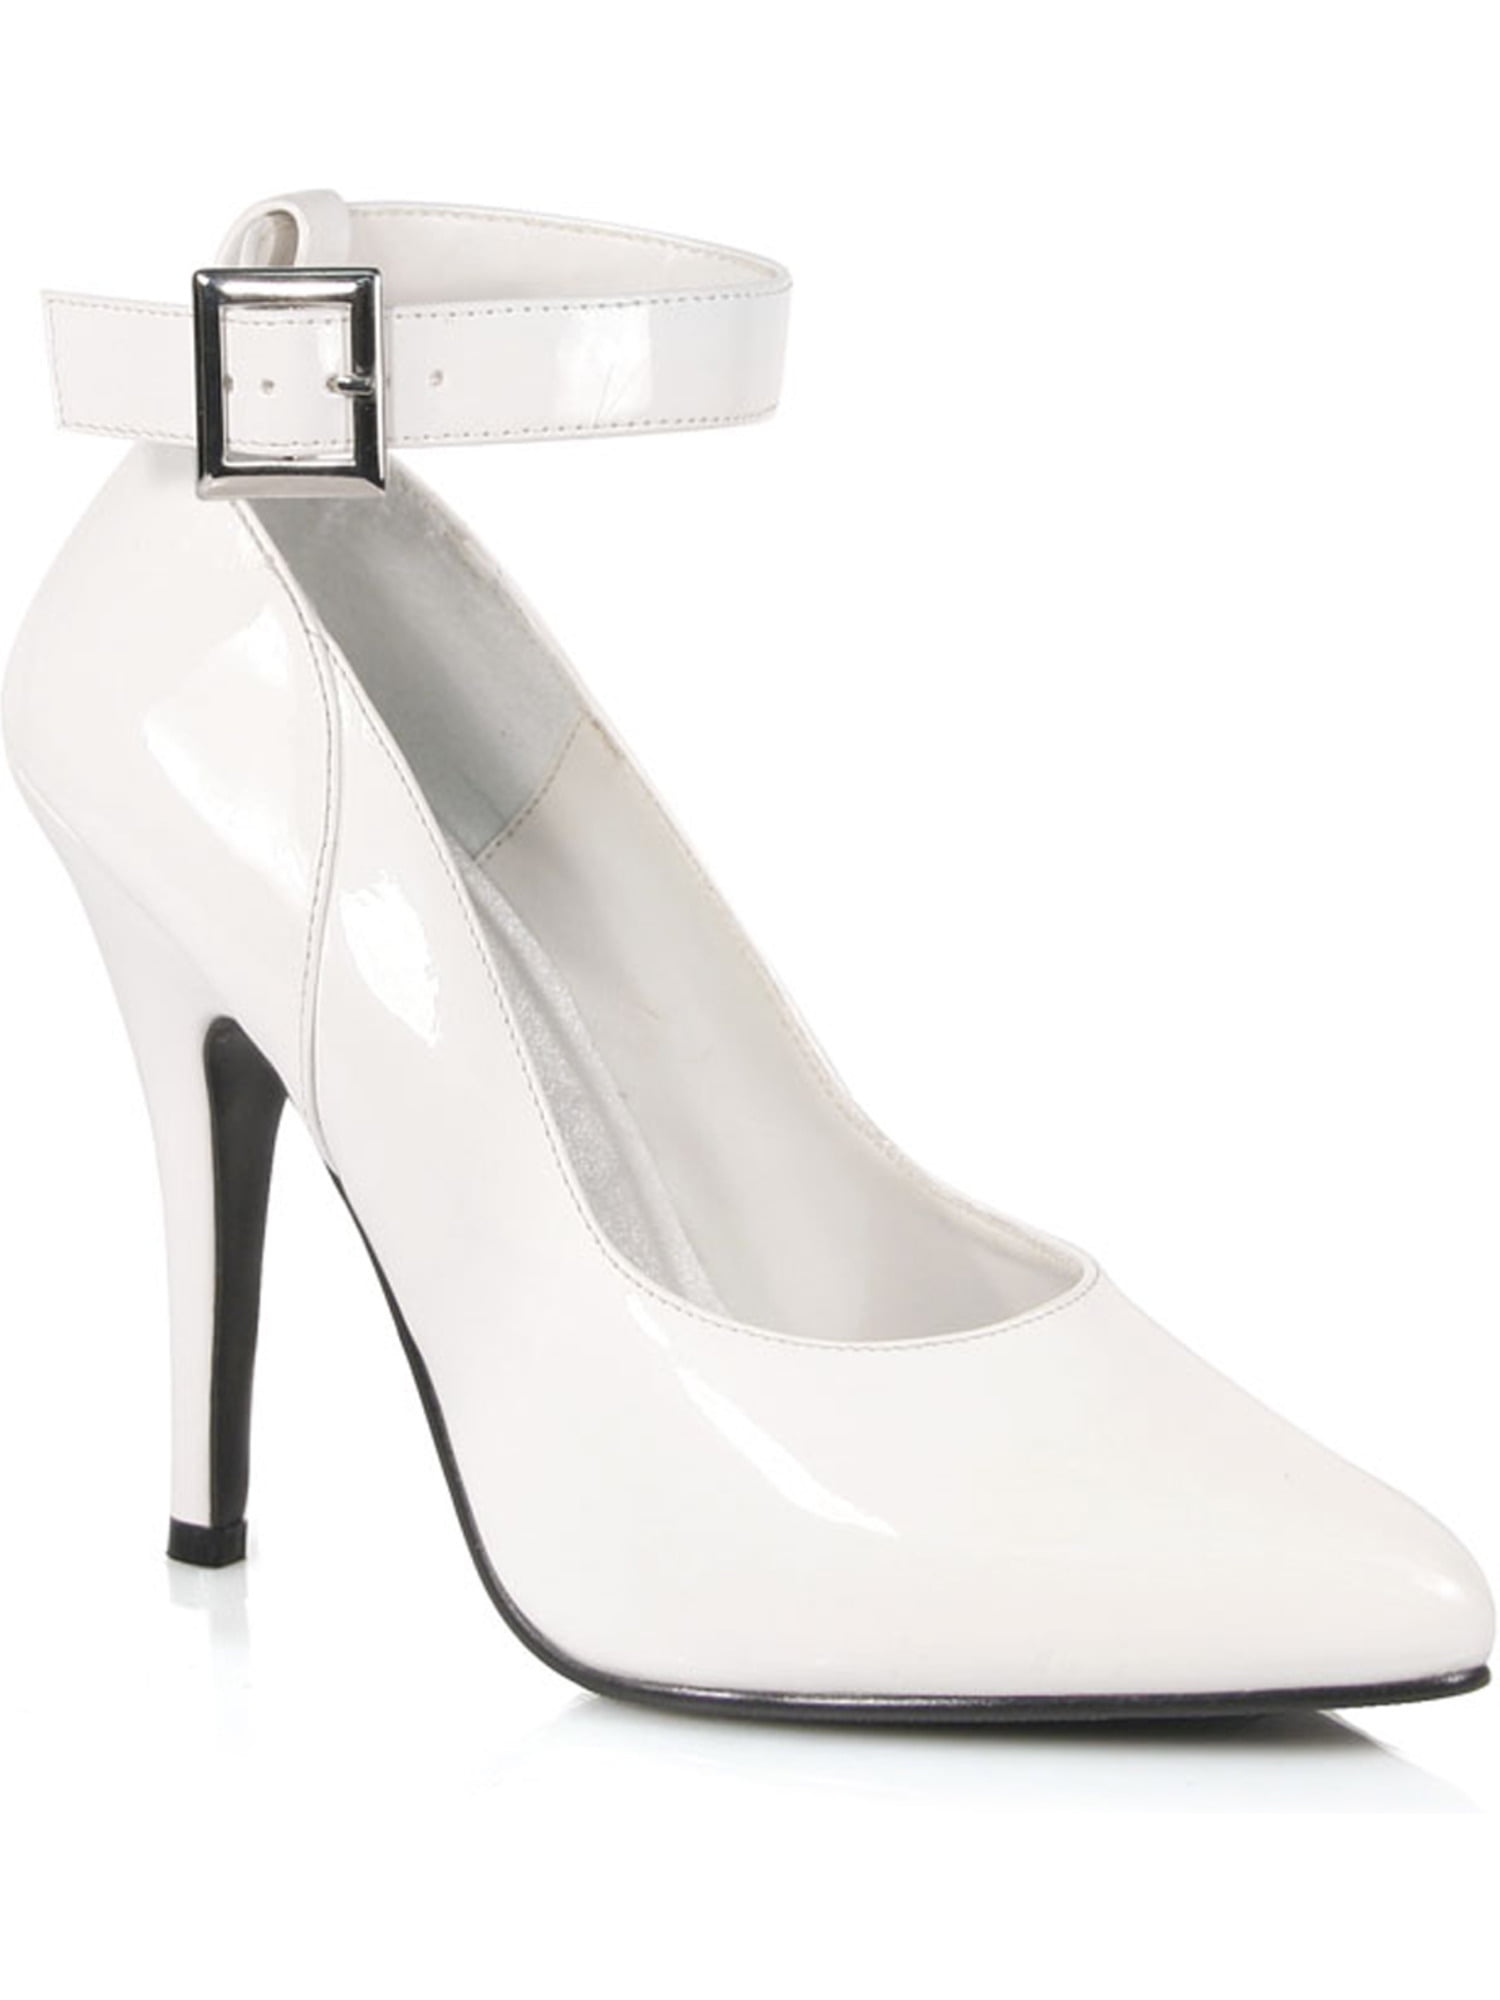 Pleaser - Womens White Pumps 5 Inch Heels Buckle Ankle Strap Dressy